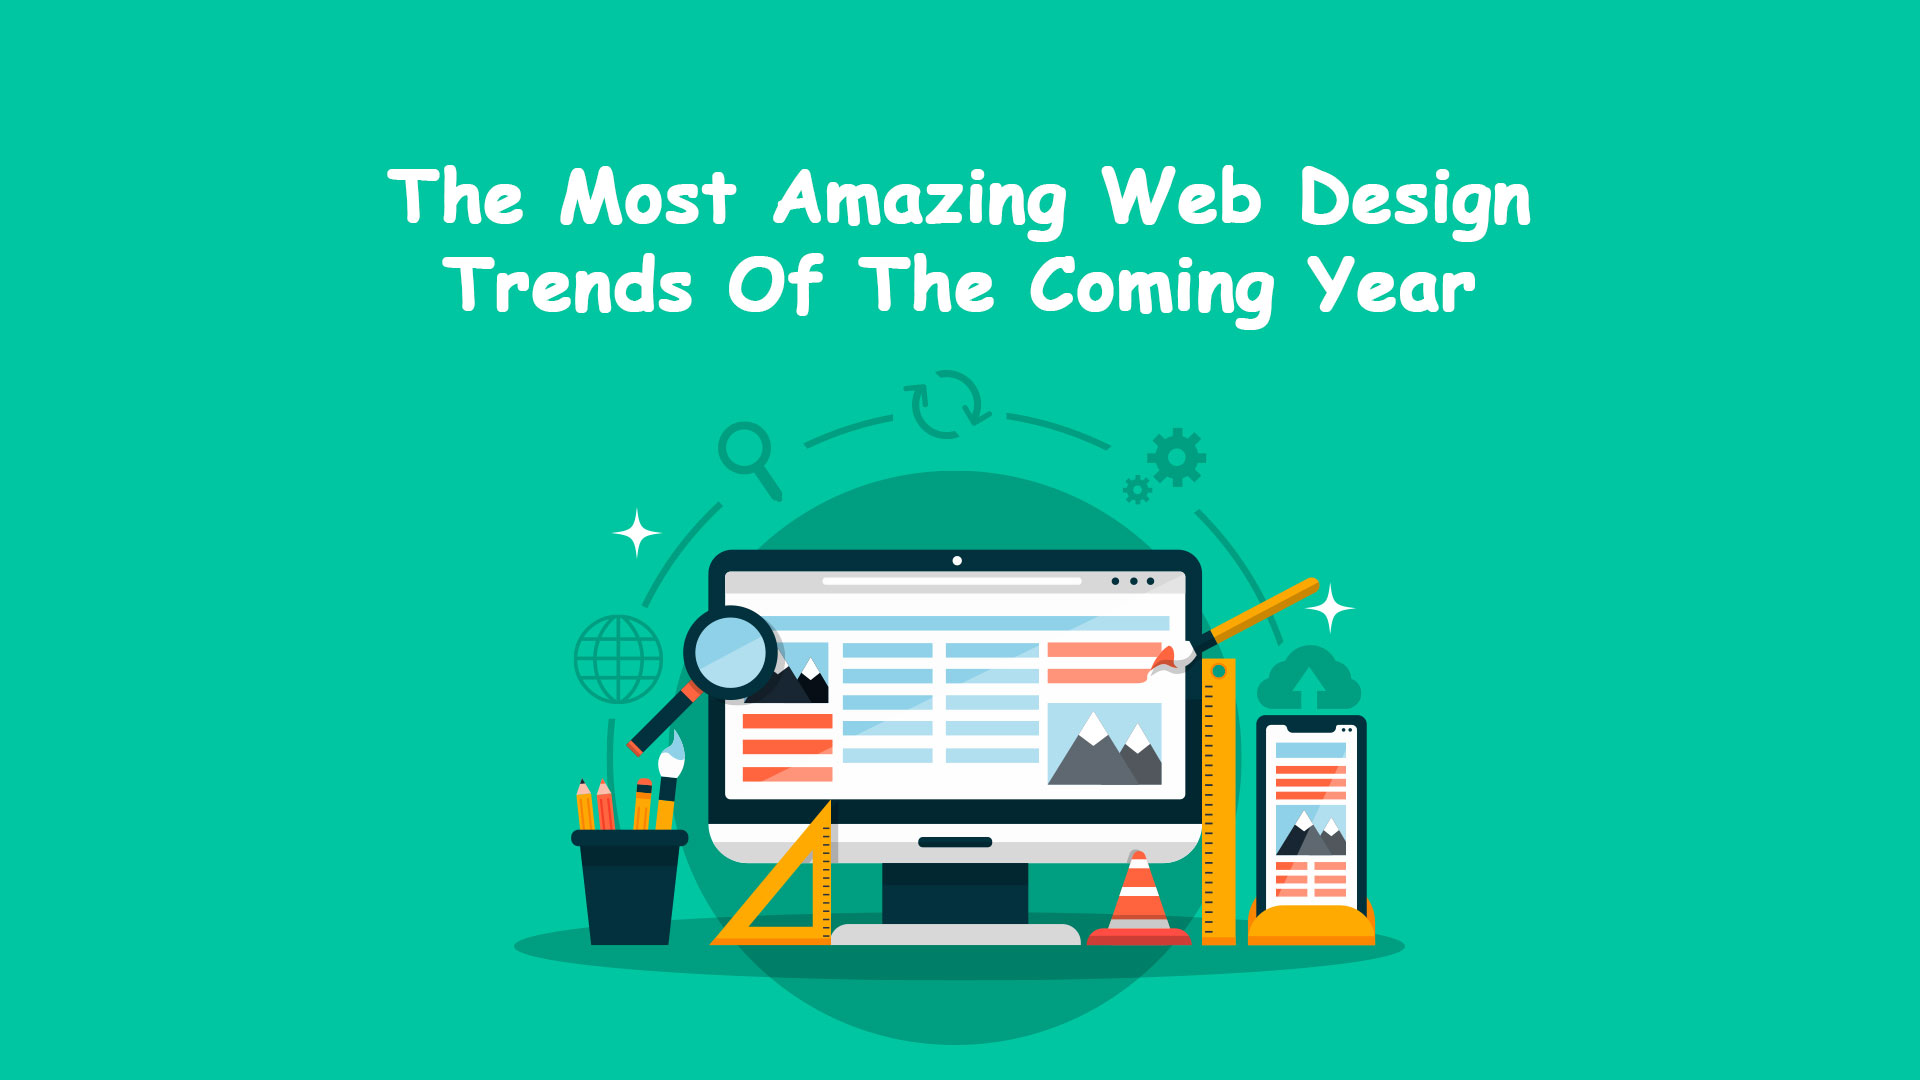 The Most Amazing Web Design Trends of the Coming Year